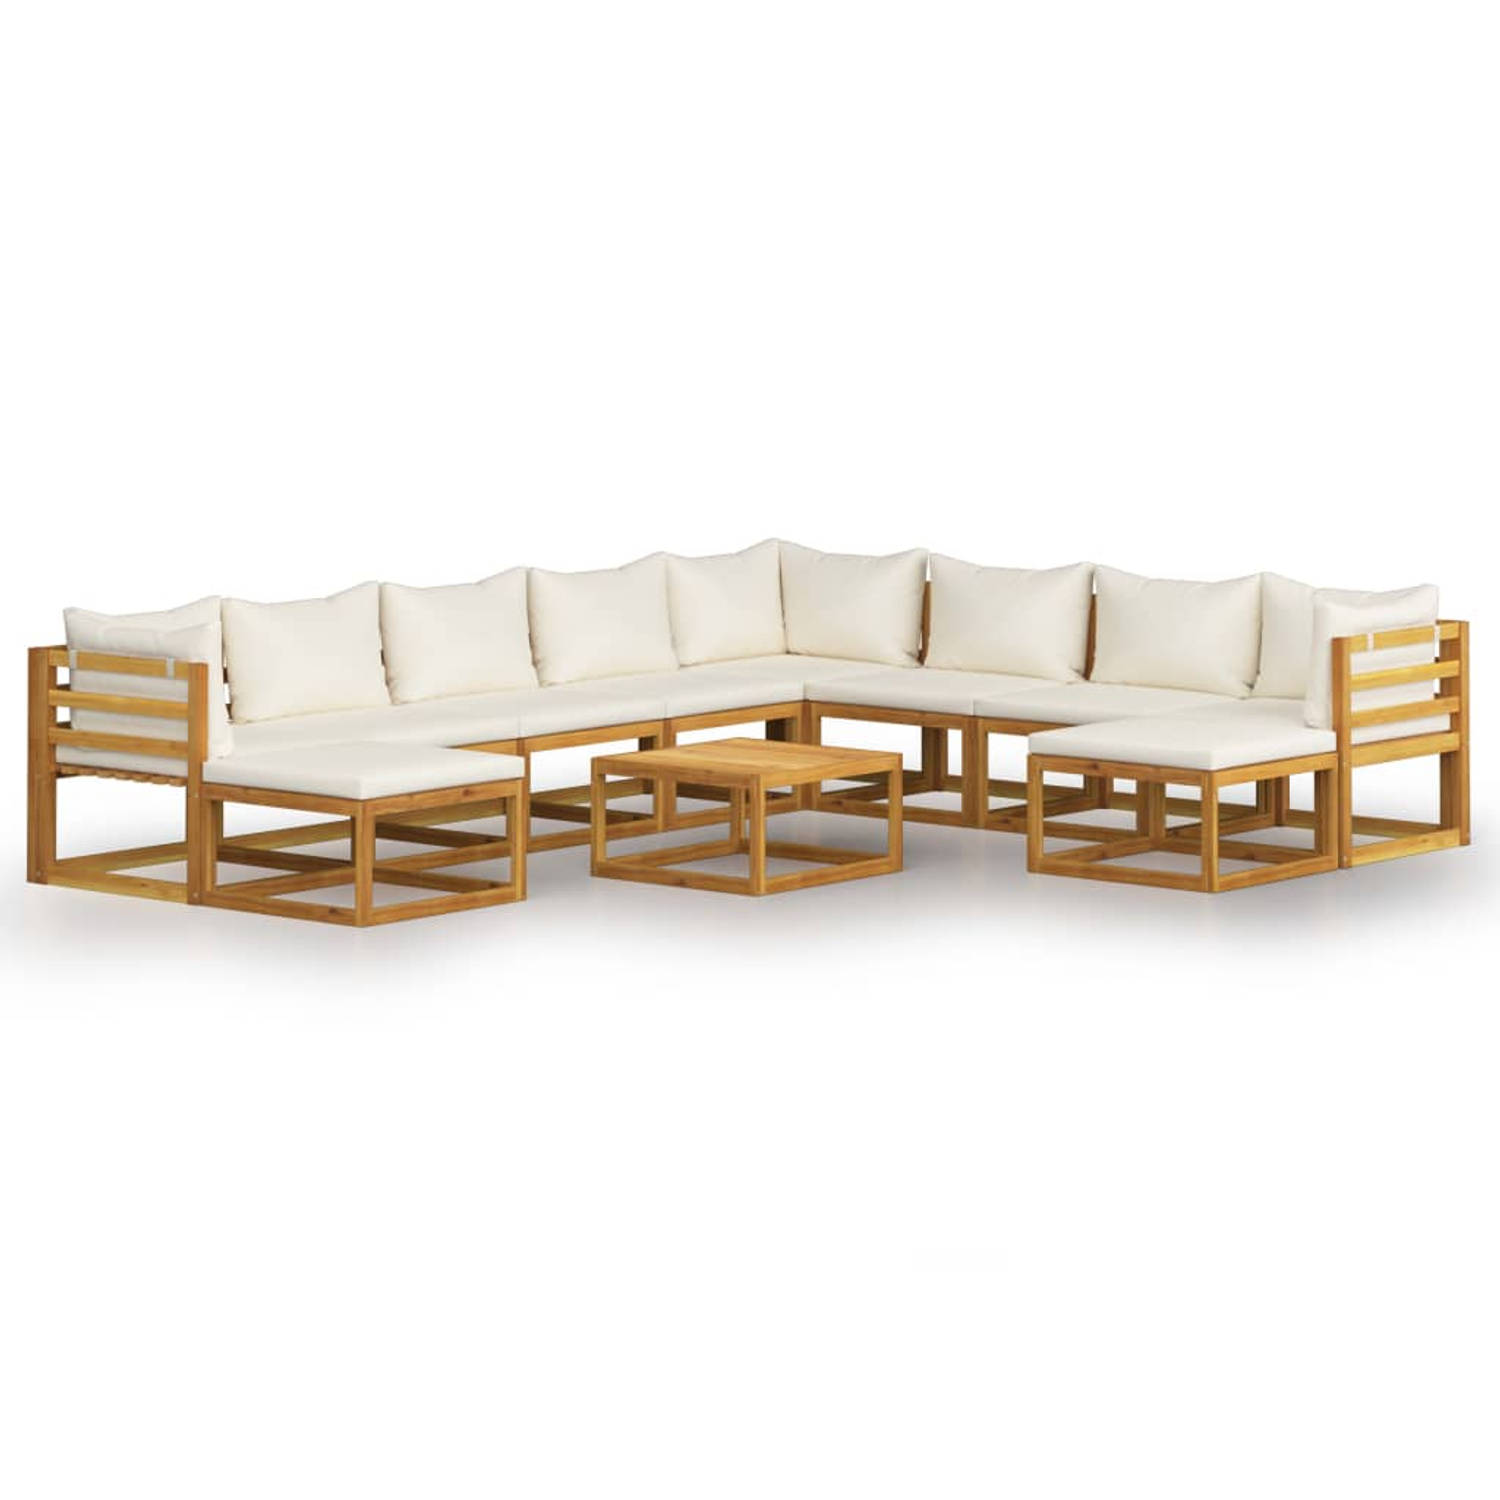 The Living Store 11-delige Loungeset met kussens massief acaciahout crème - Tuinset